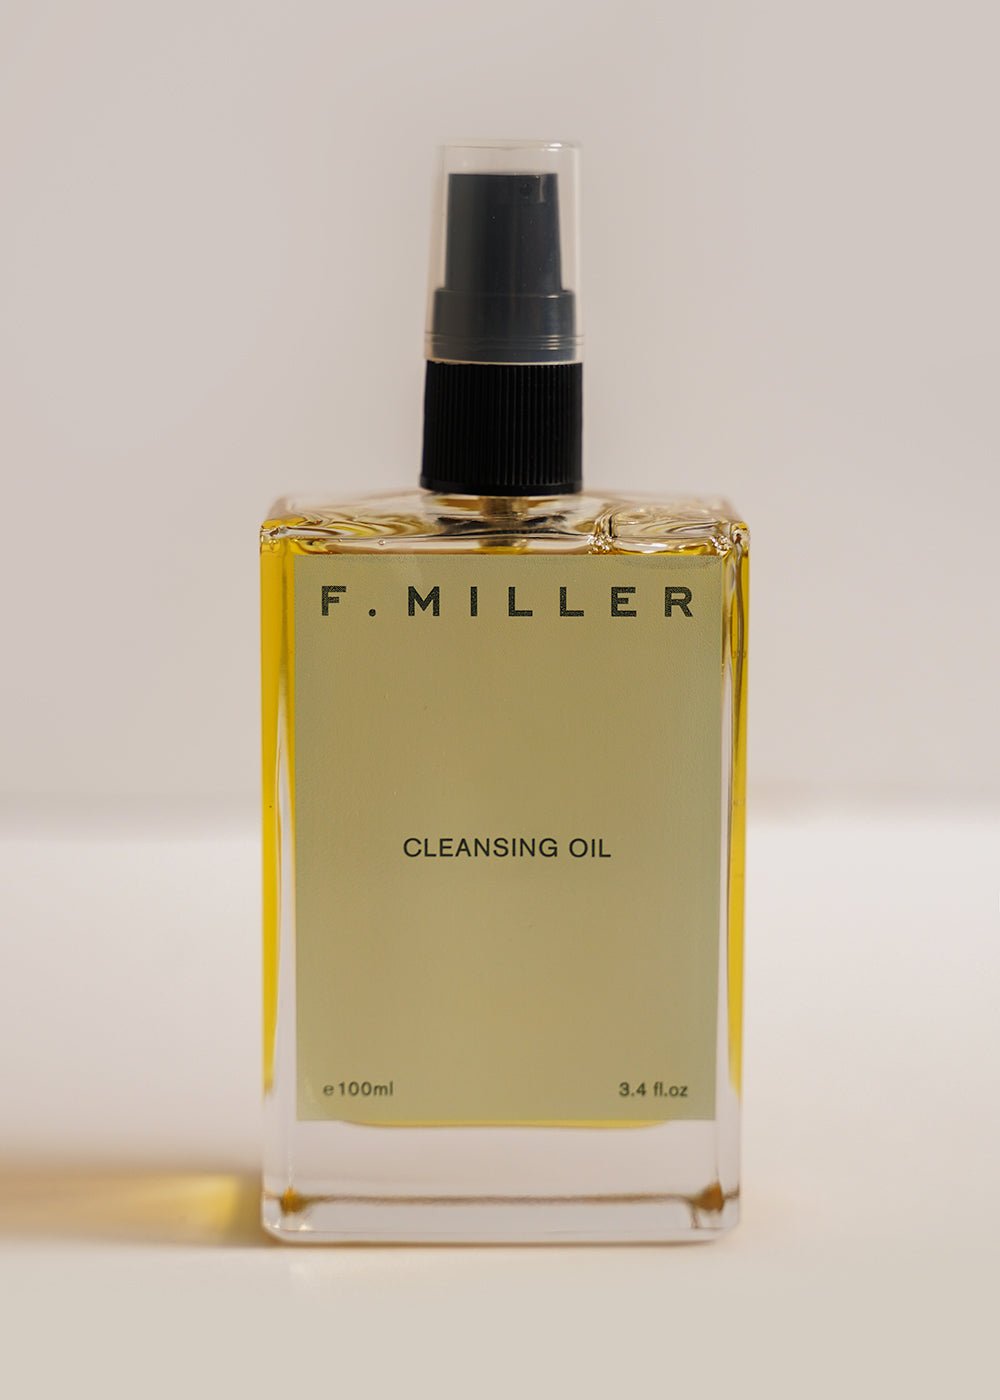 F. MILLER Cleansing Oil - New Classics Studios Sustainable Ethical Fashion Canada